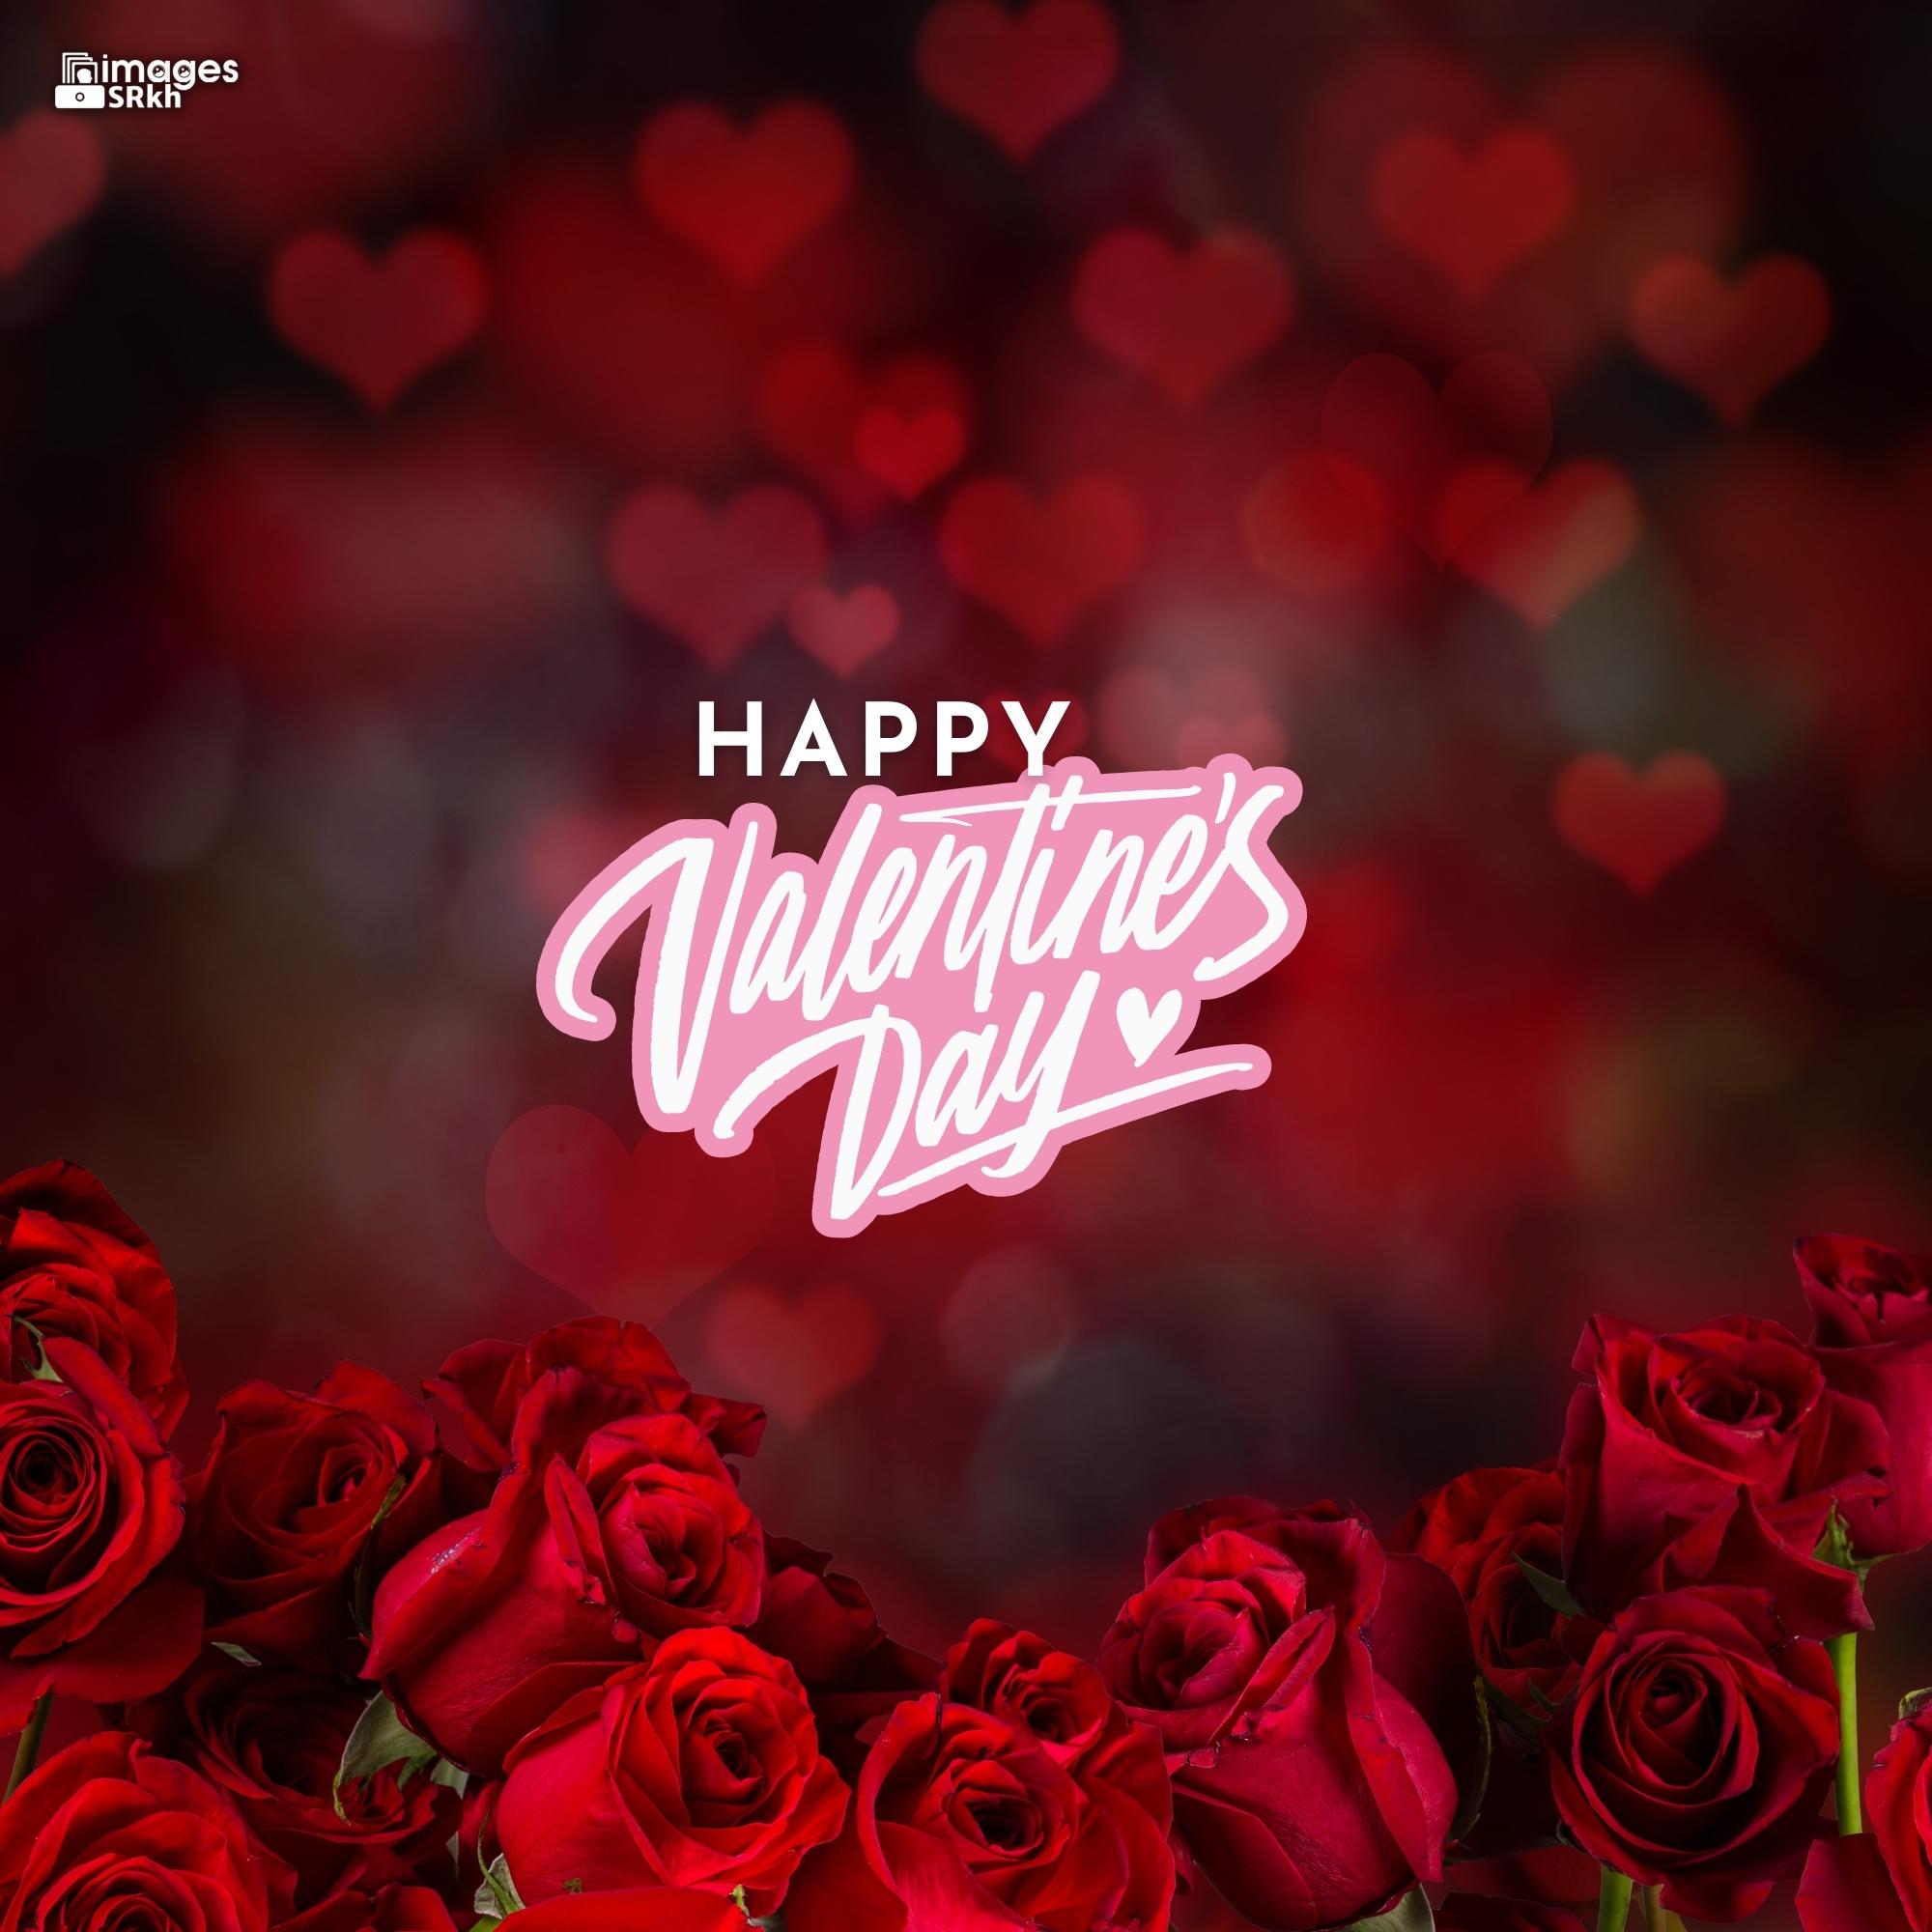 Happy Valentines Day | 450 | PREMIUM IMAGES | Wishes for Love